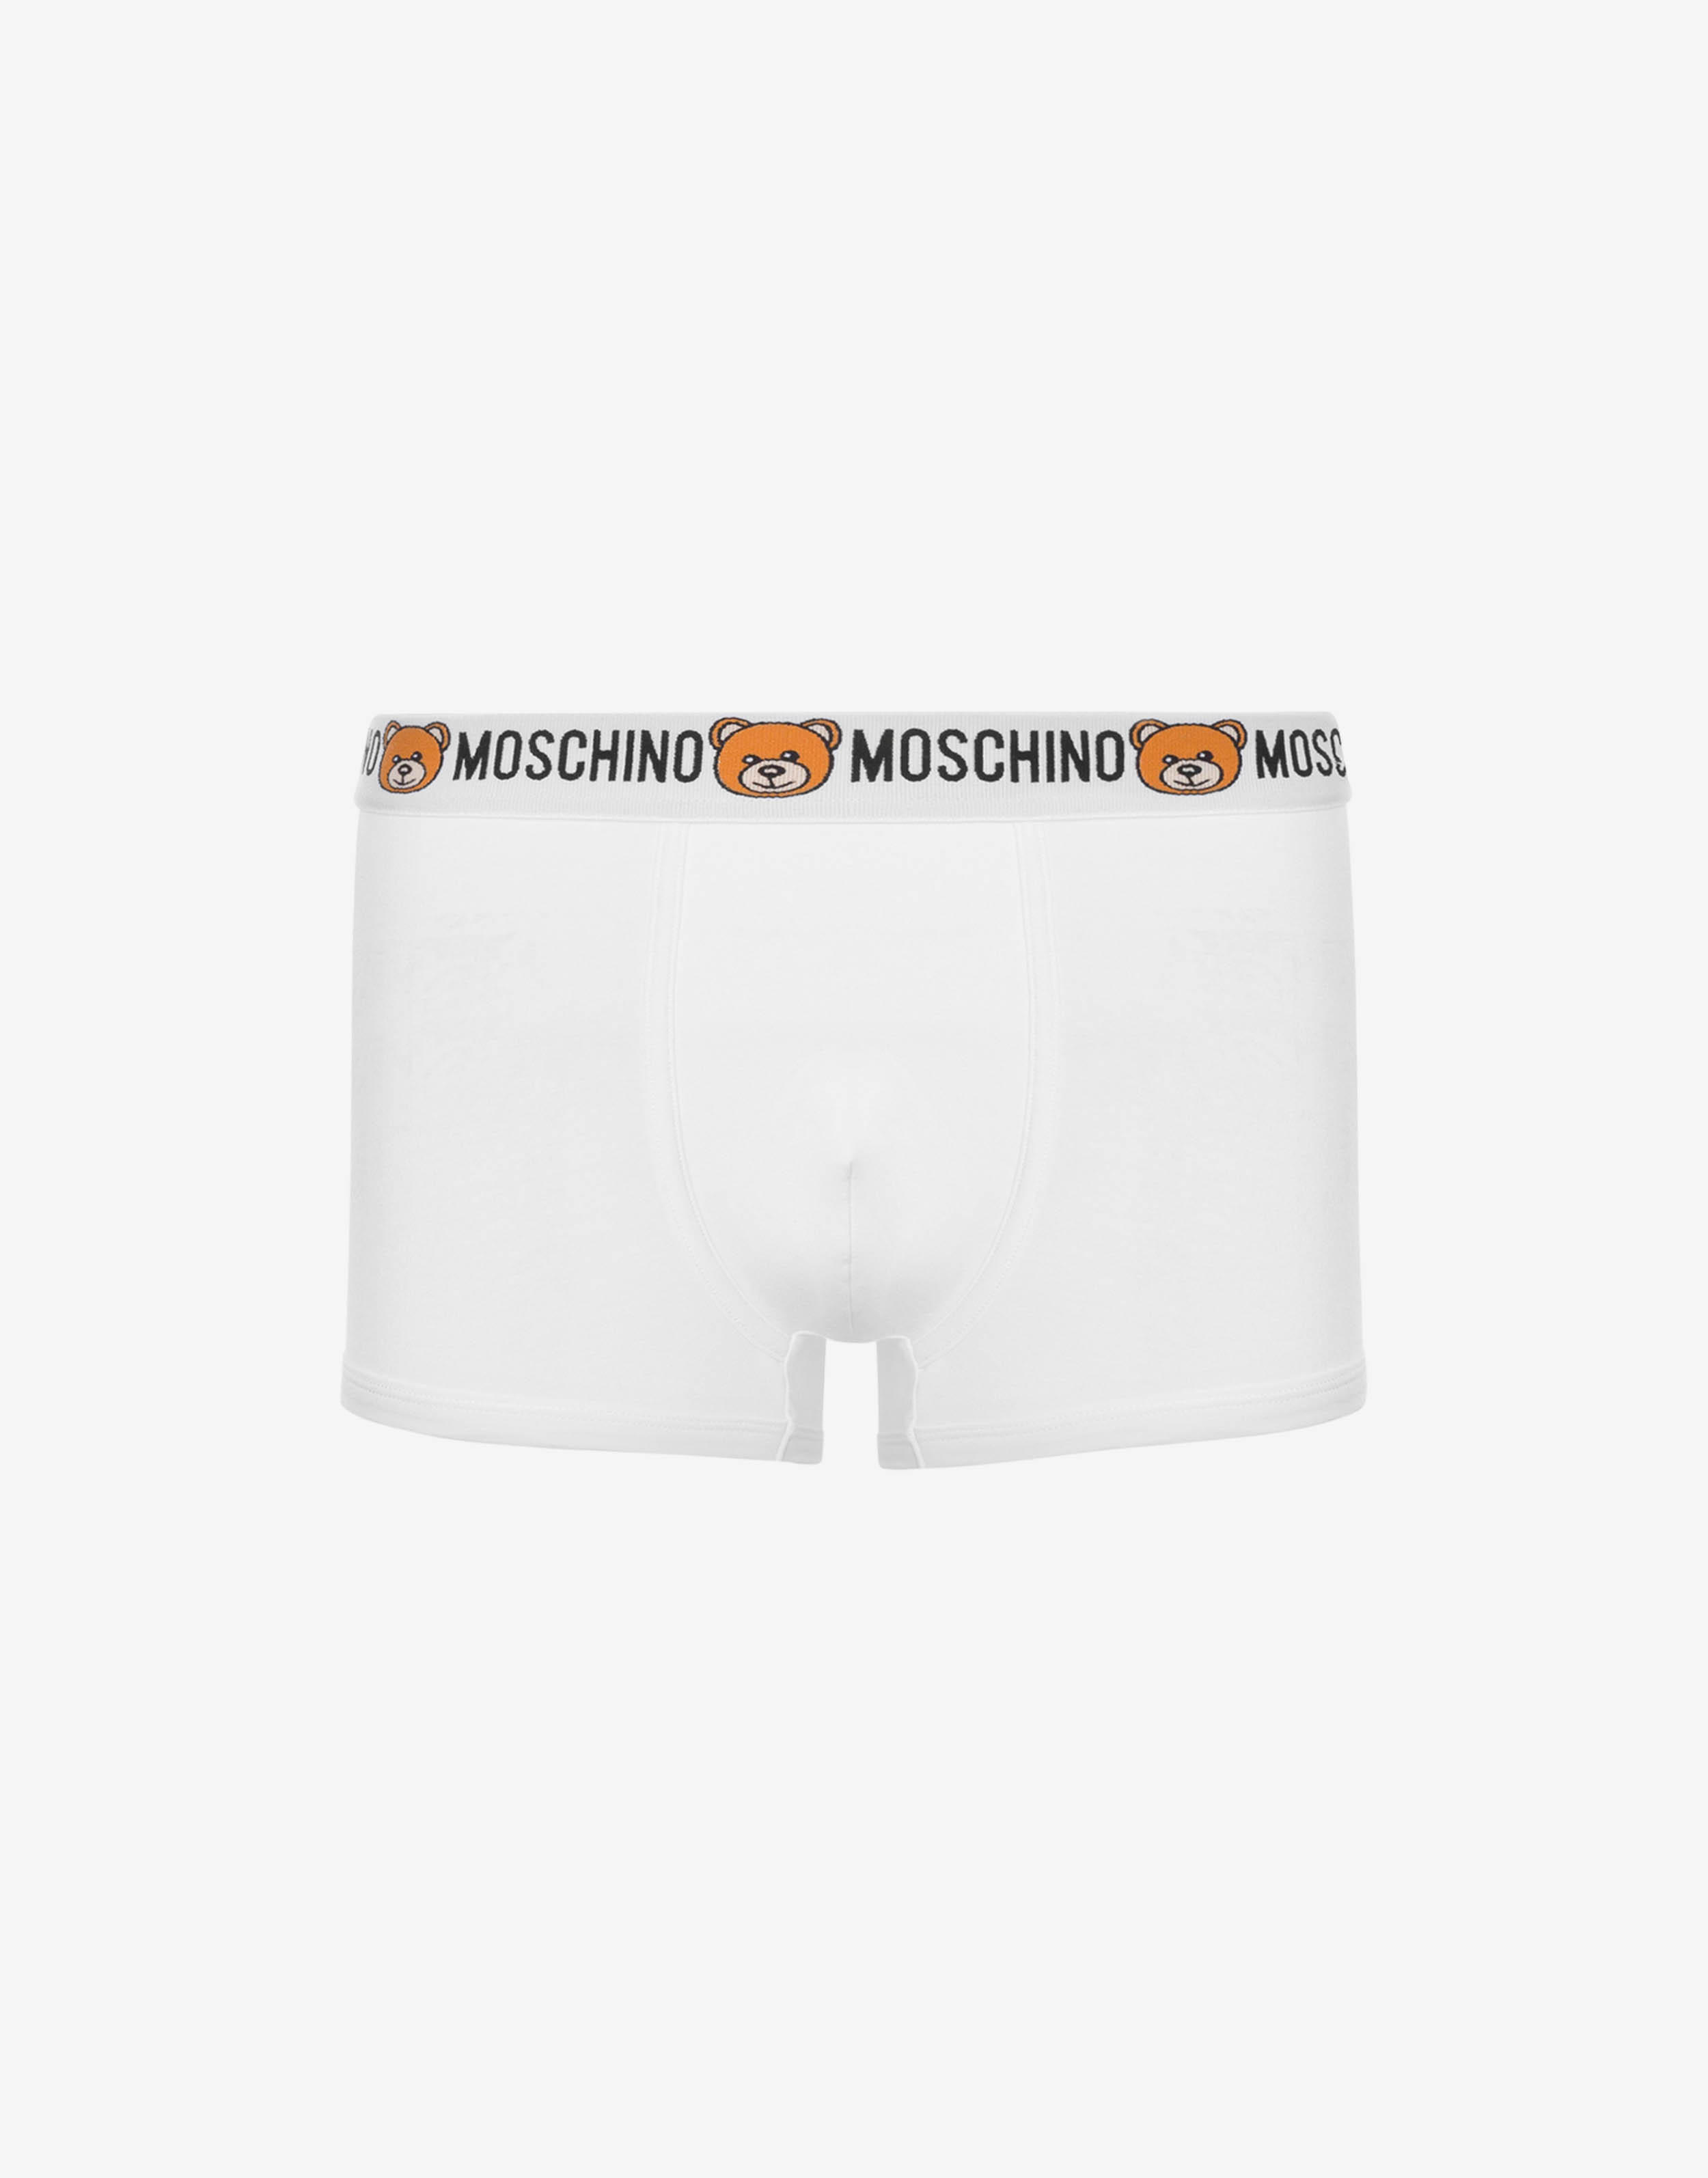 Underbear boxer  Moschino Official Store